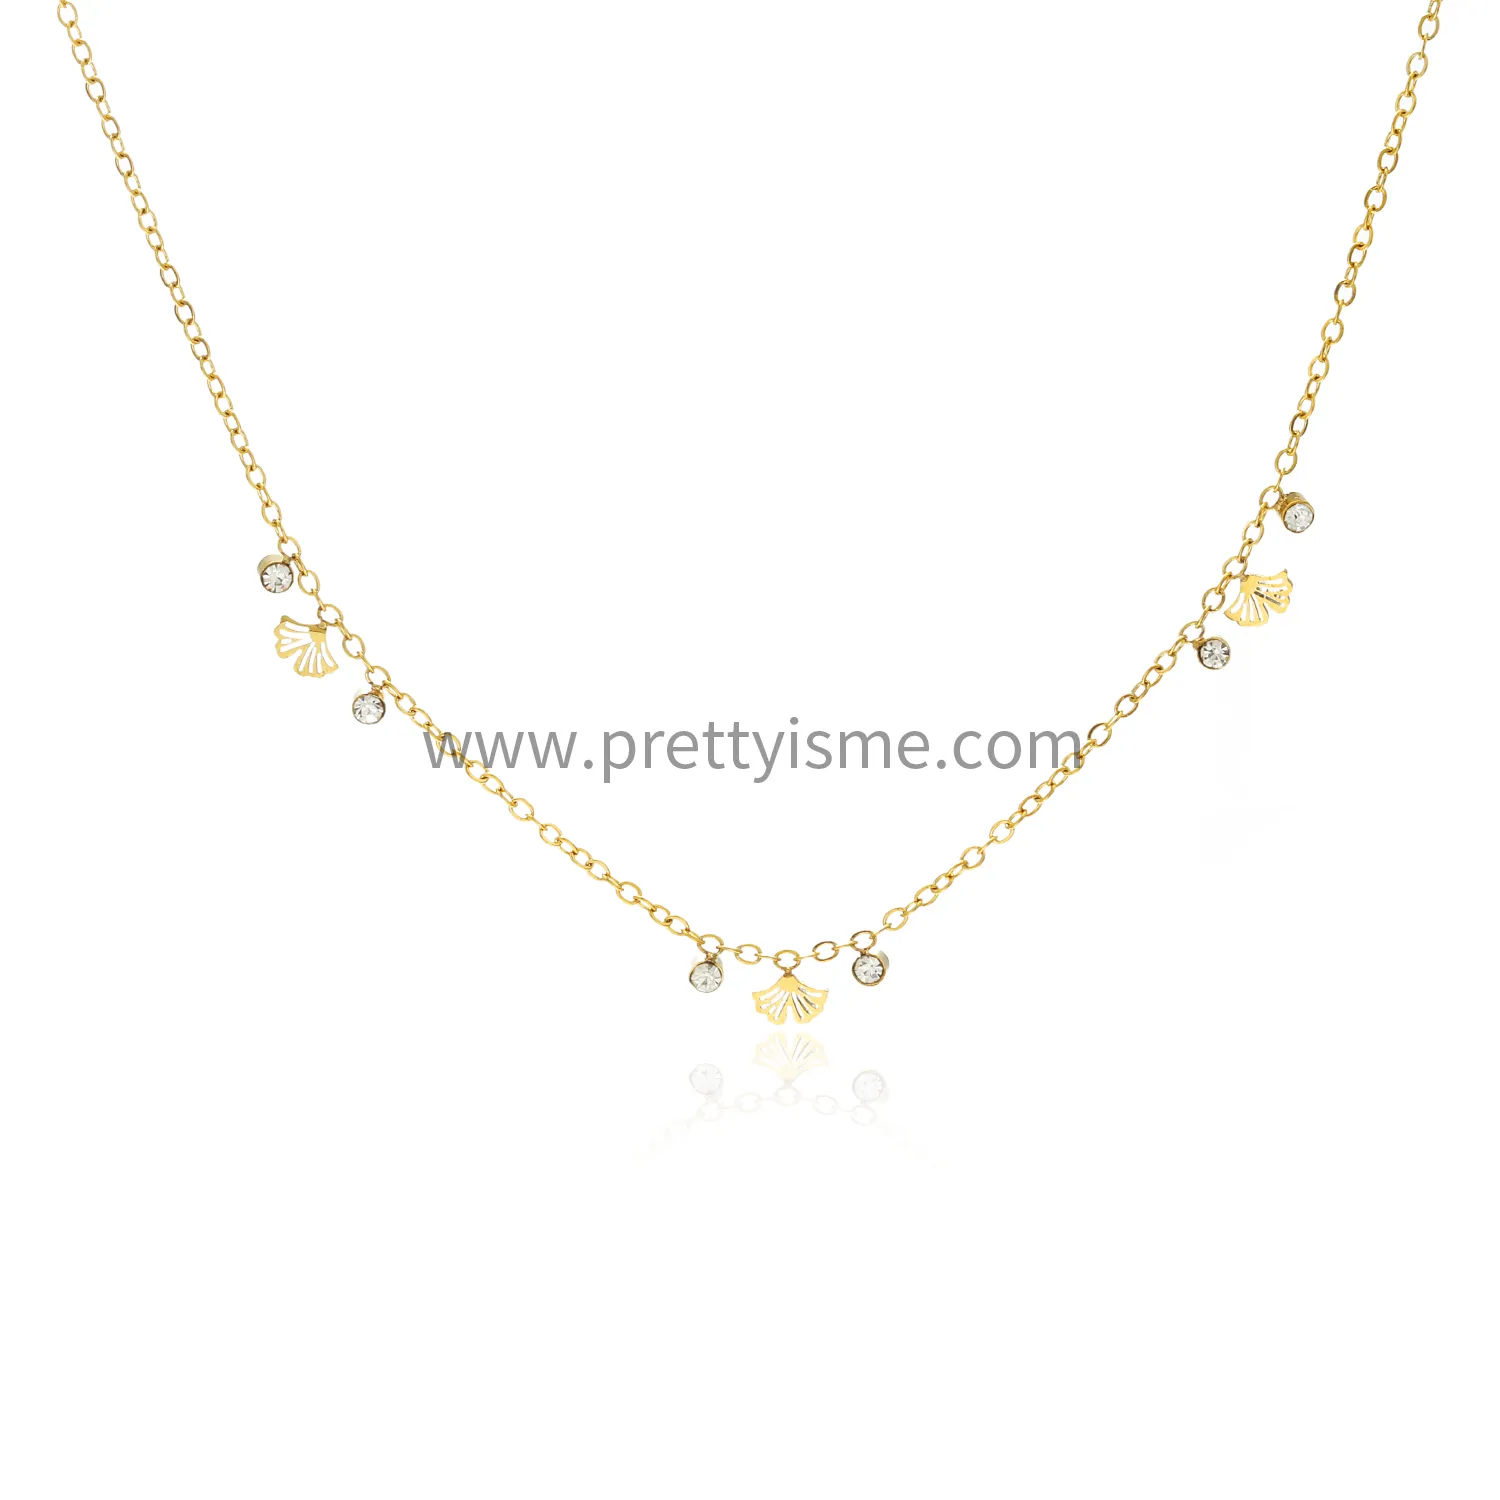 French Elegant Stainless Steel 18k Gold Plated Thin Necklace with Diamond Delicate Pendant (5).webp